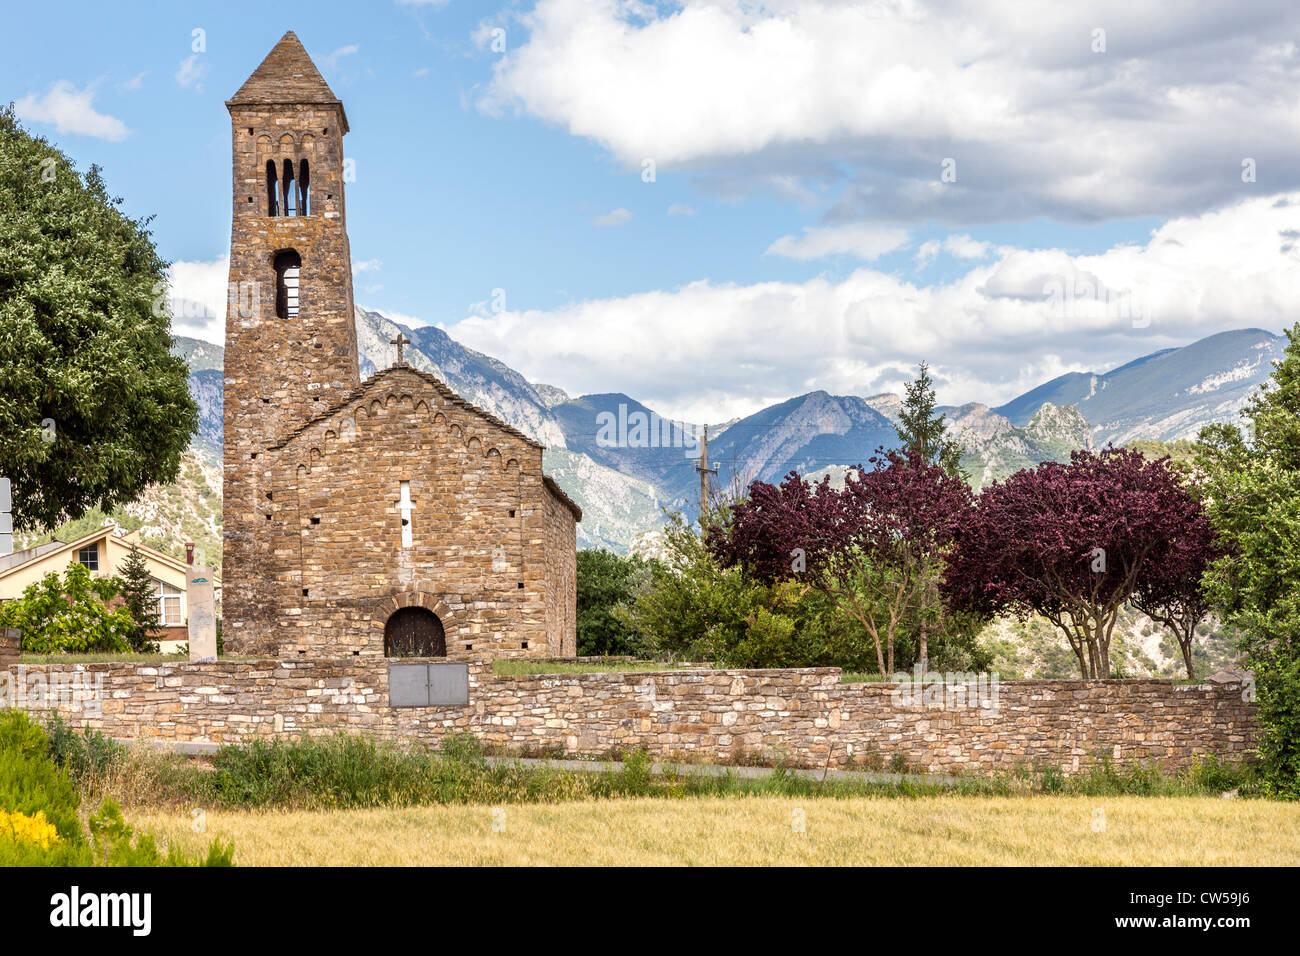 Village Church at Coll de Nargo, in the foothills of the Spanish Pyrenees, Europe. Stock Photo